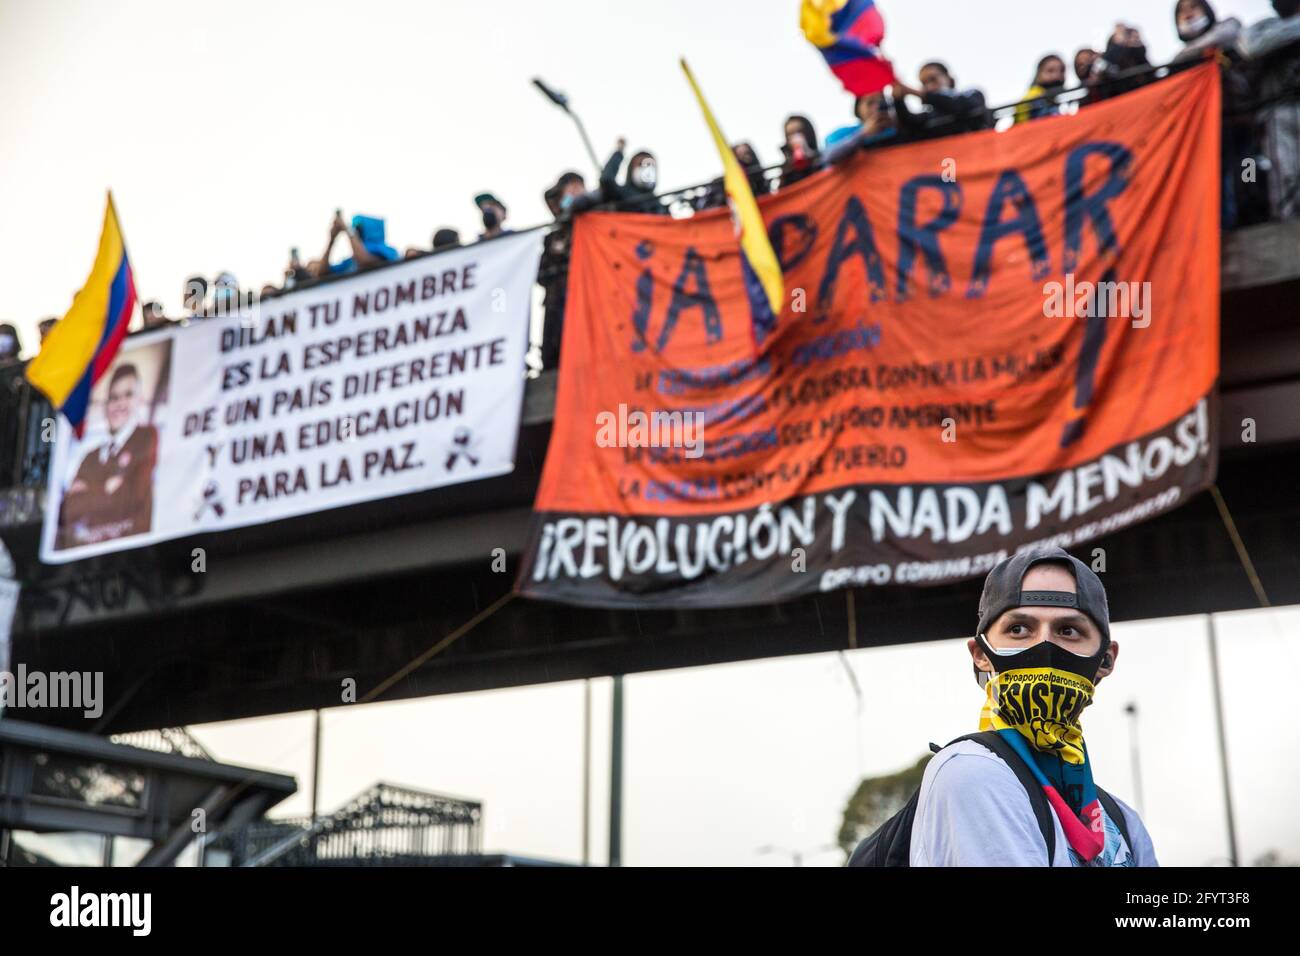 A protesters with his face covered, standing under the bridge where hang anti-government banners in Plaza de Los Heroes (Heros square). One of them commemorates the death of Dilan Cruz, a young boy killed by police in 2019 during the demonstration.On the 28th of May, a month after the national strike first began, protesters, continue to demonstrate on the streets of Bogotá and all over the country to oppose government policies. At the capital city, multiple demonstrations and marches took places during the day, with thousands of people participating in the strike. At Plaza de Los Heroes (Heros Stock Photo